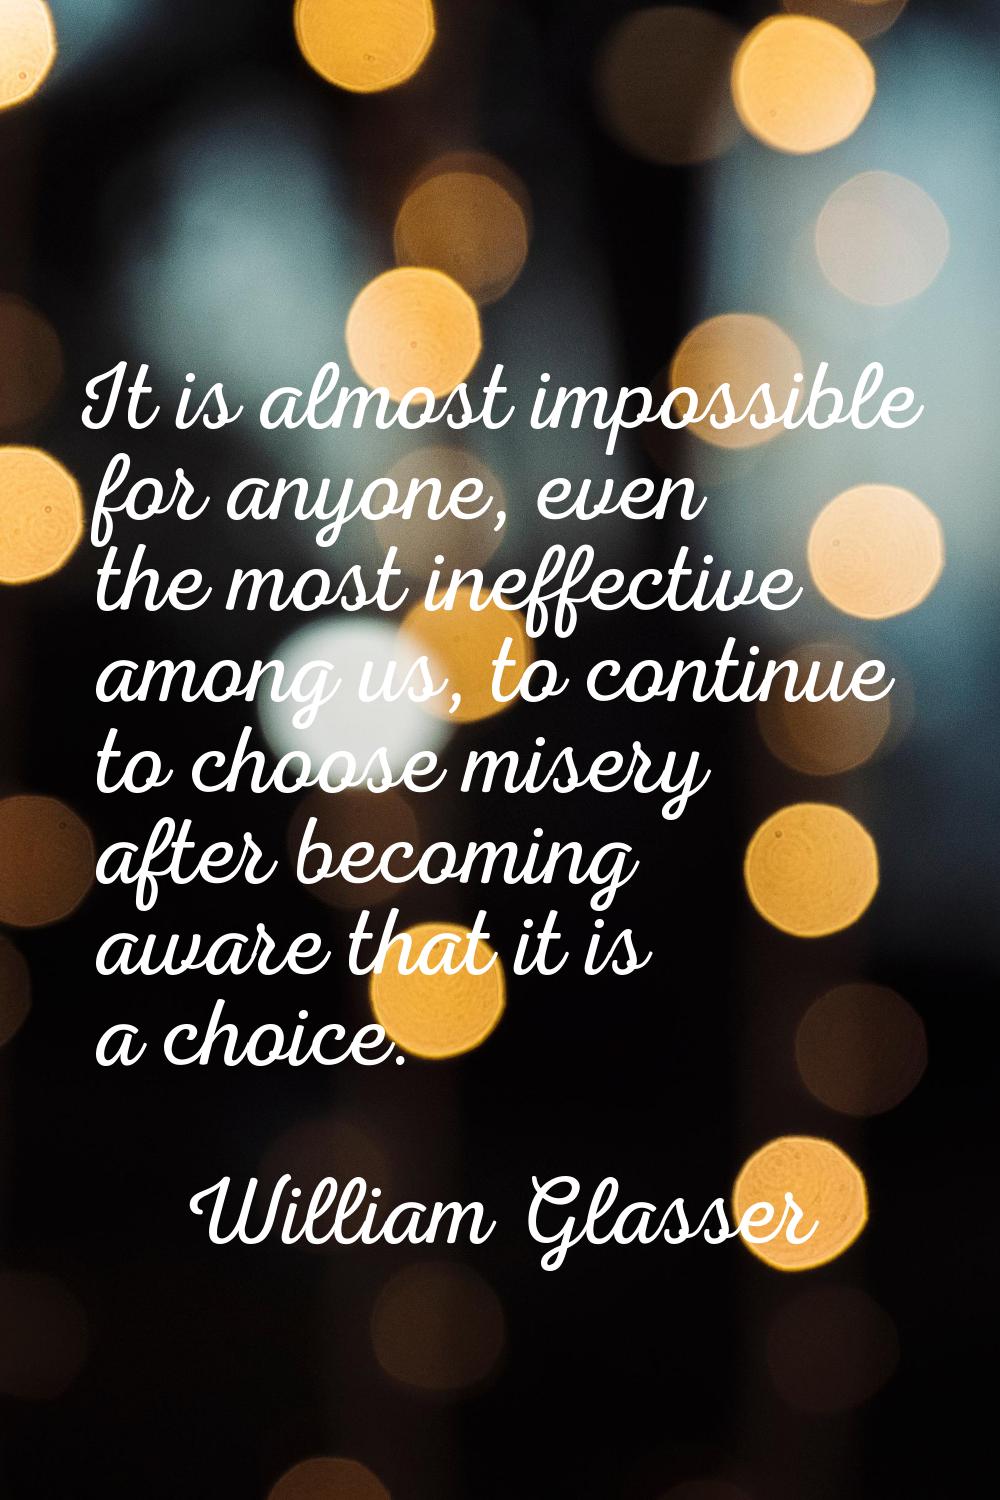 It is almost impossible for anyone, even the most ineffective among us, to continue to choose miser